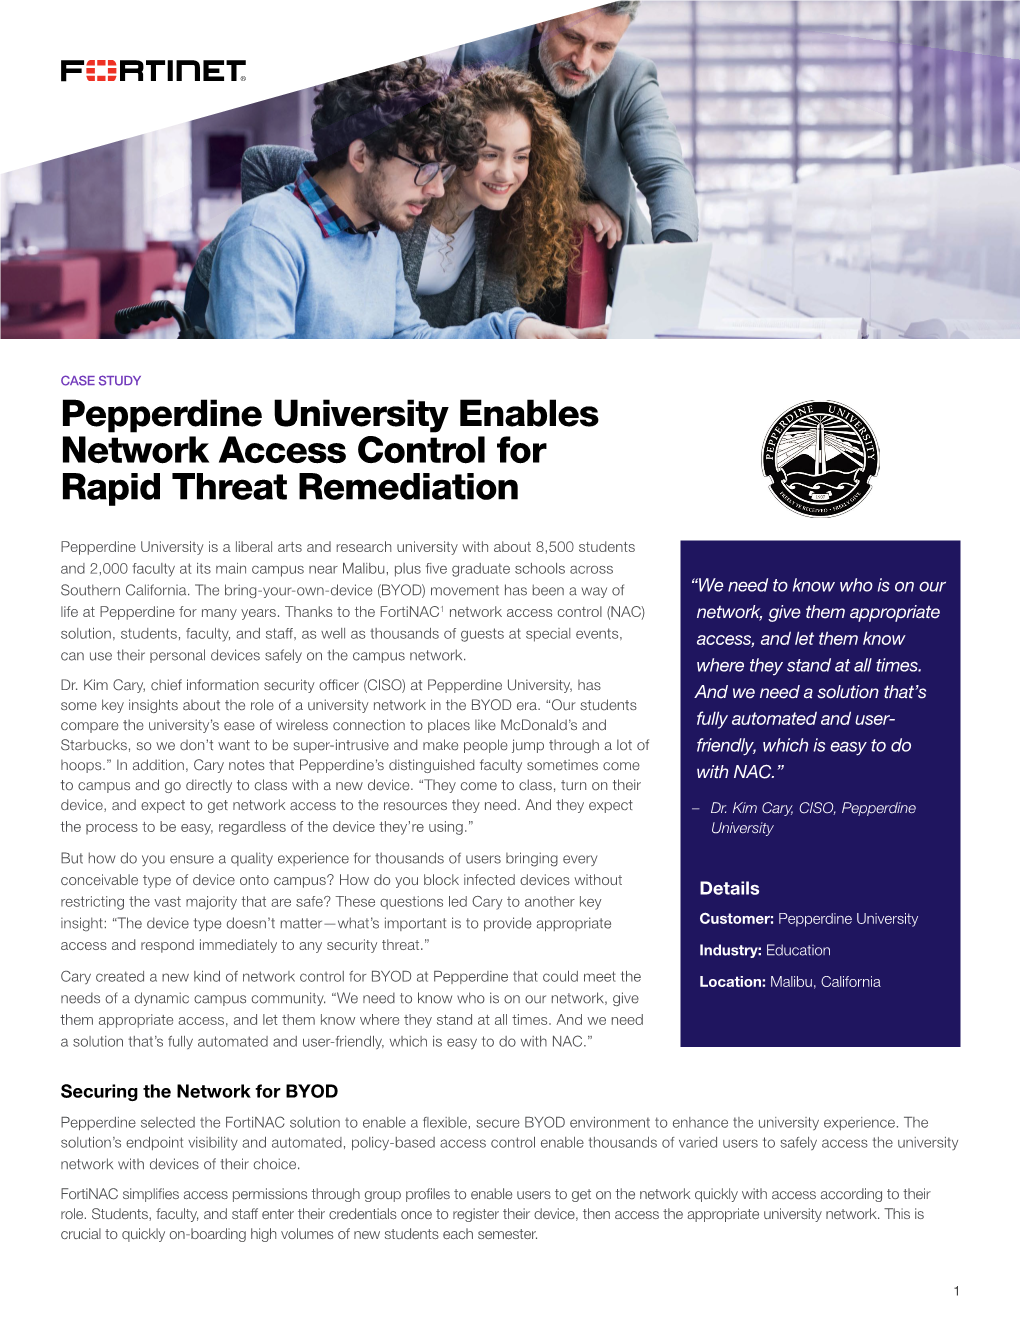 Pepperdine University Enables Network Access Control for Rapid Threat Remediation